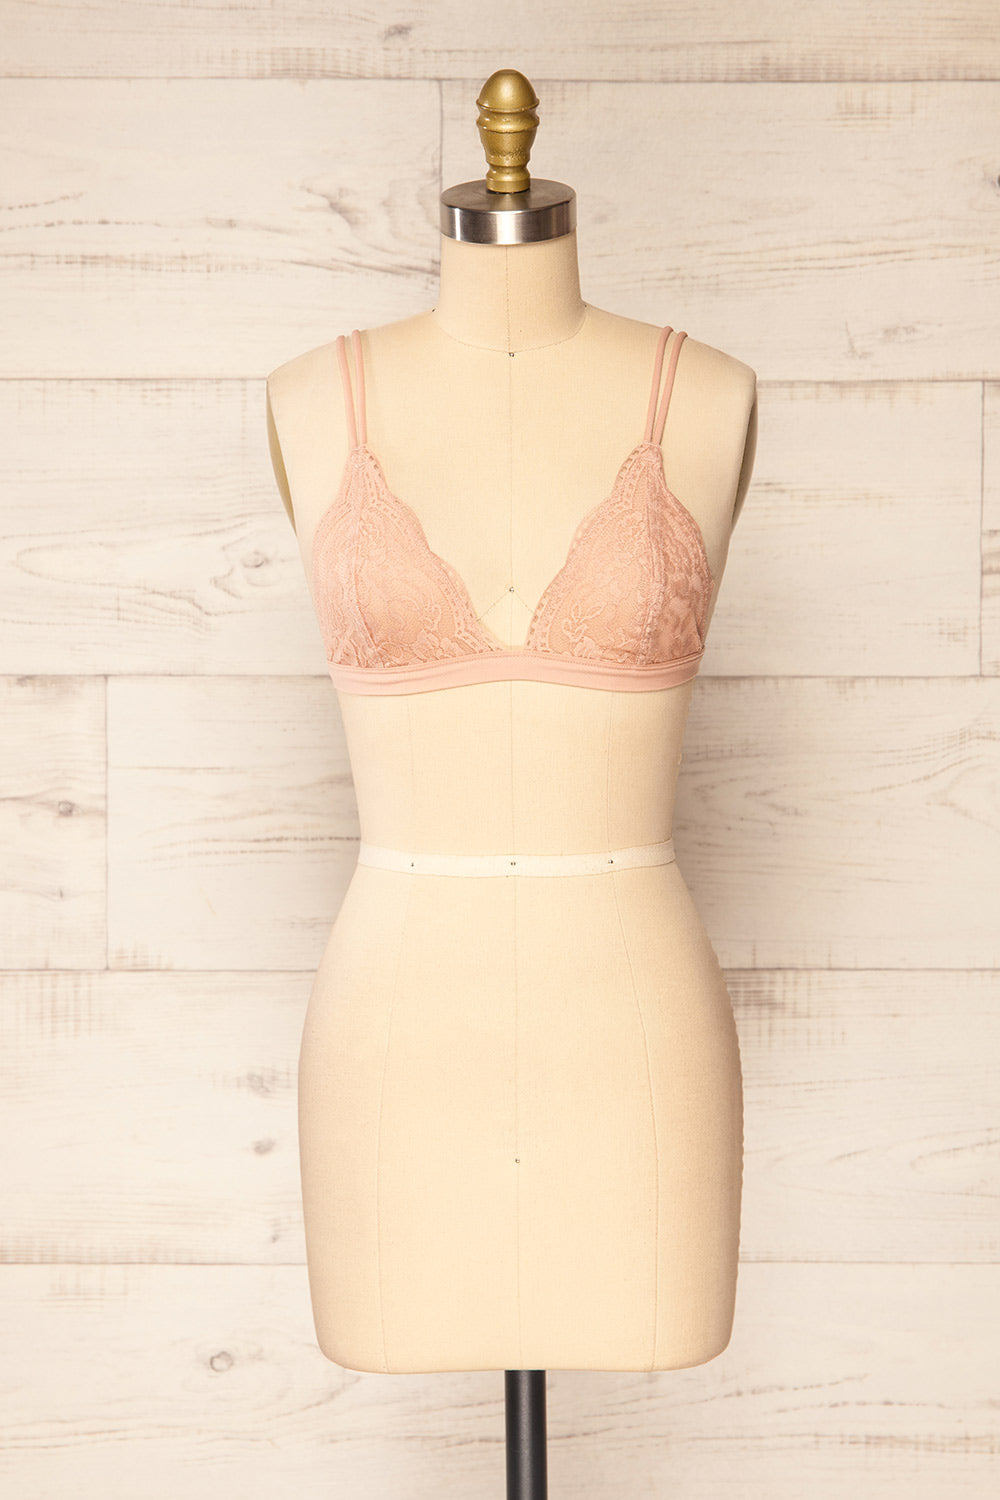 Ati Pink Lace Bralette | Boutique 1861 front view